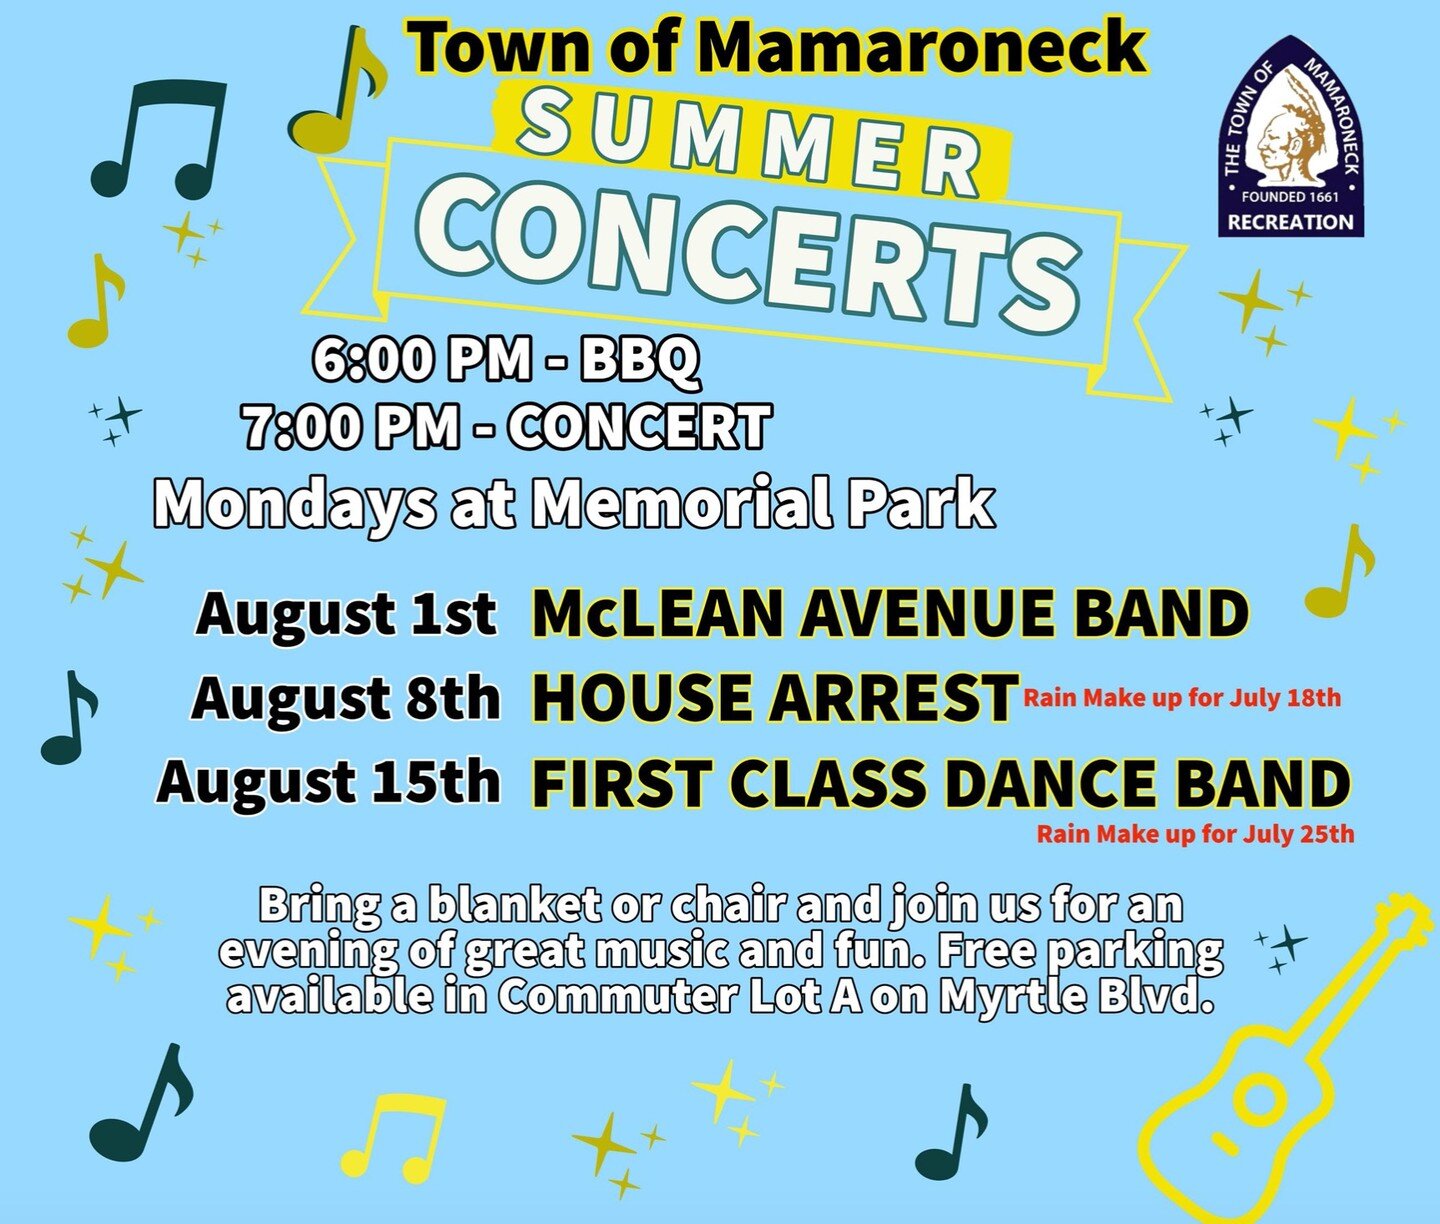 Concert tonight at Memorial Park! Join us and grab some drinks to enjoy at the park!
See you here!